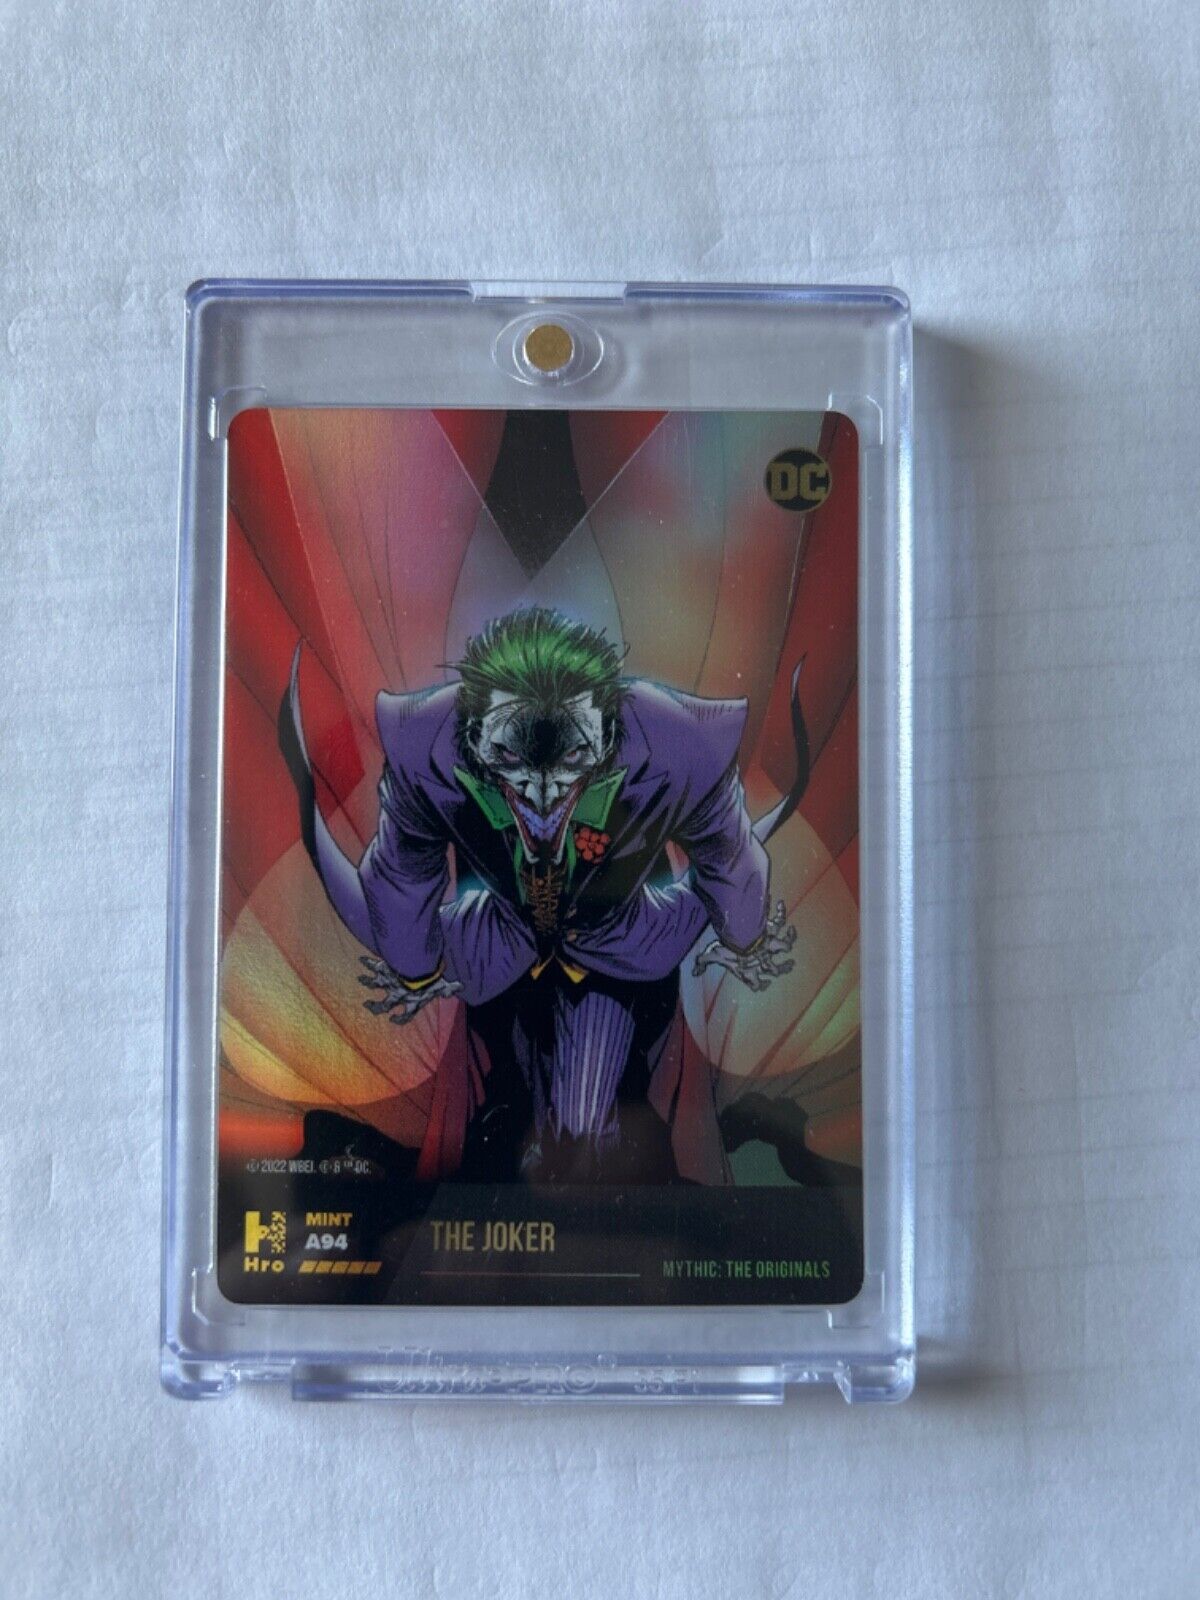 DC The Joker A94 Physical Card Only Gold Foil MYTHIC THE ORIGINALS